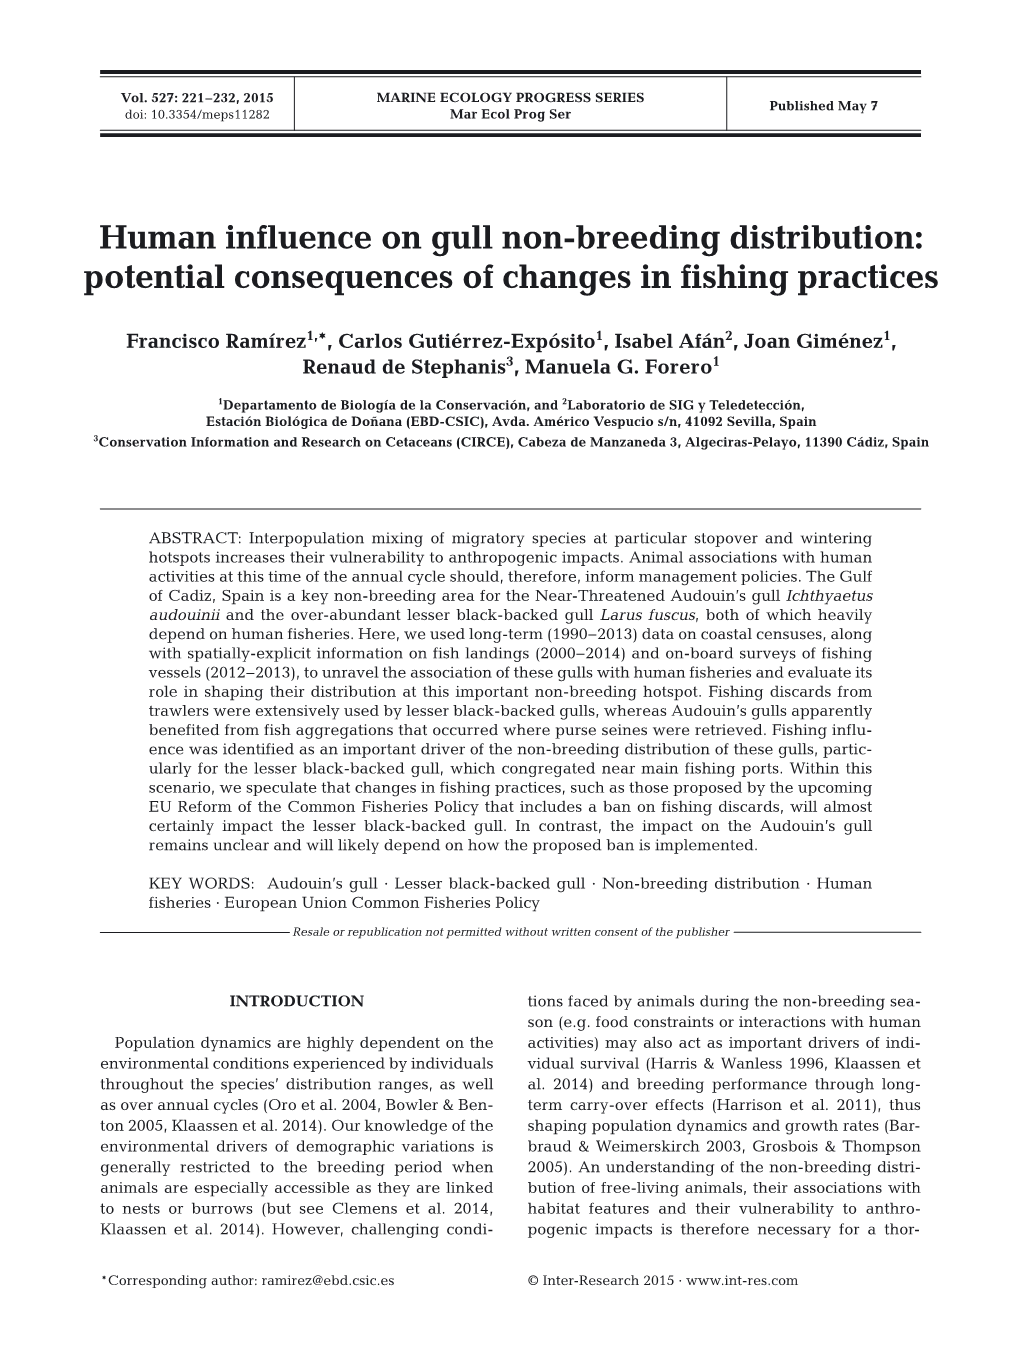 Human Influence on Gull Non-Breeding Distribution: Potential Consequences of Changes in Fishing Practices